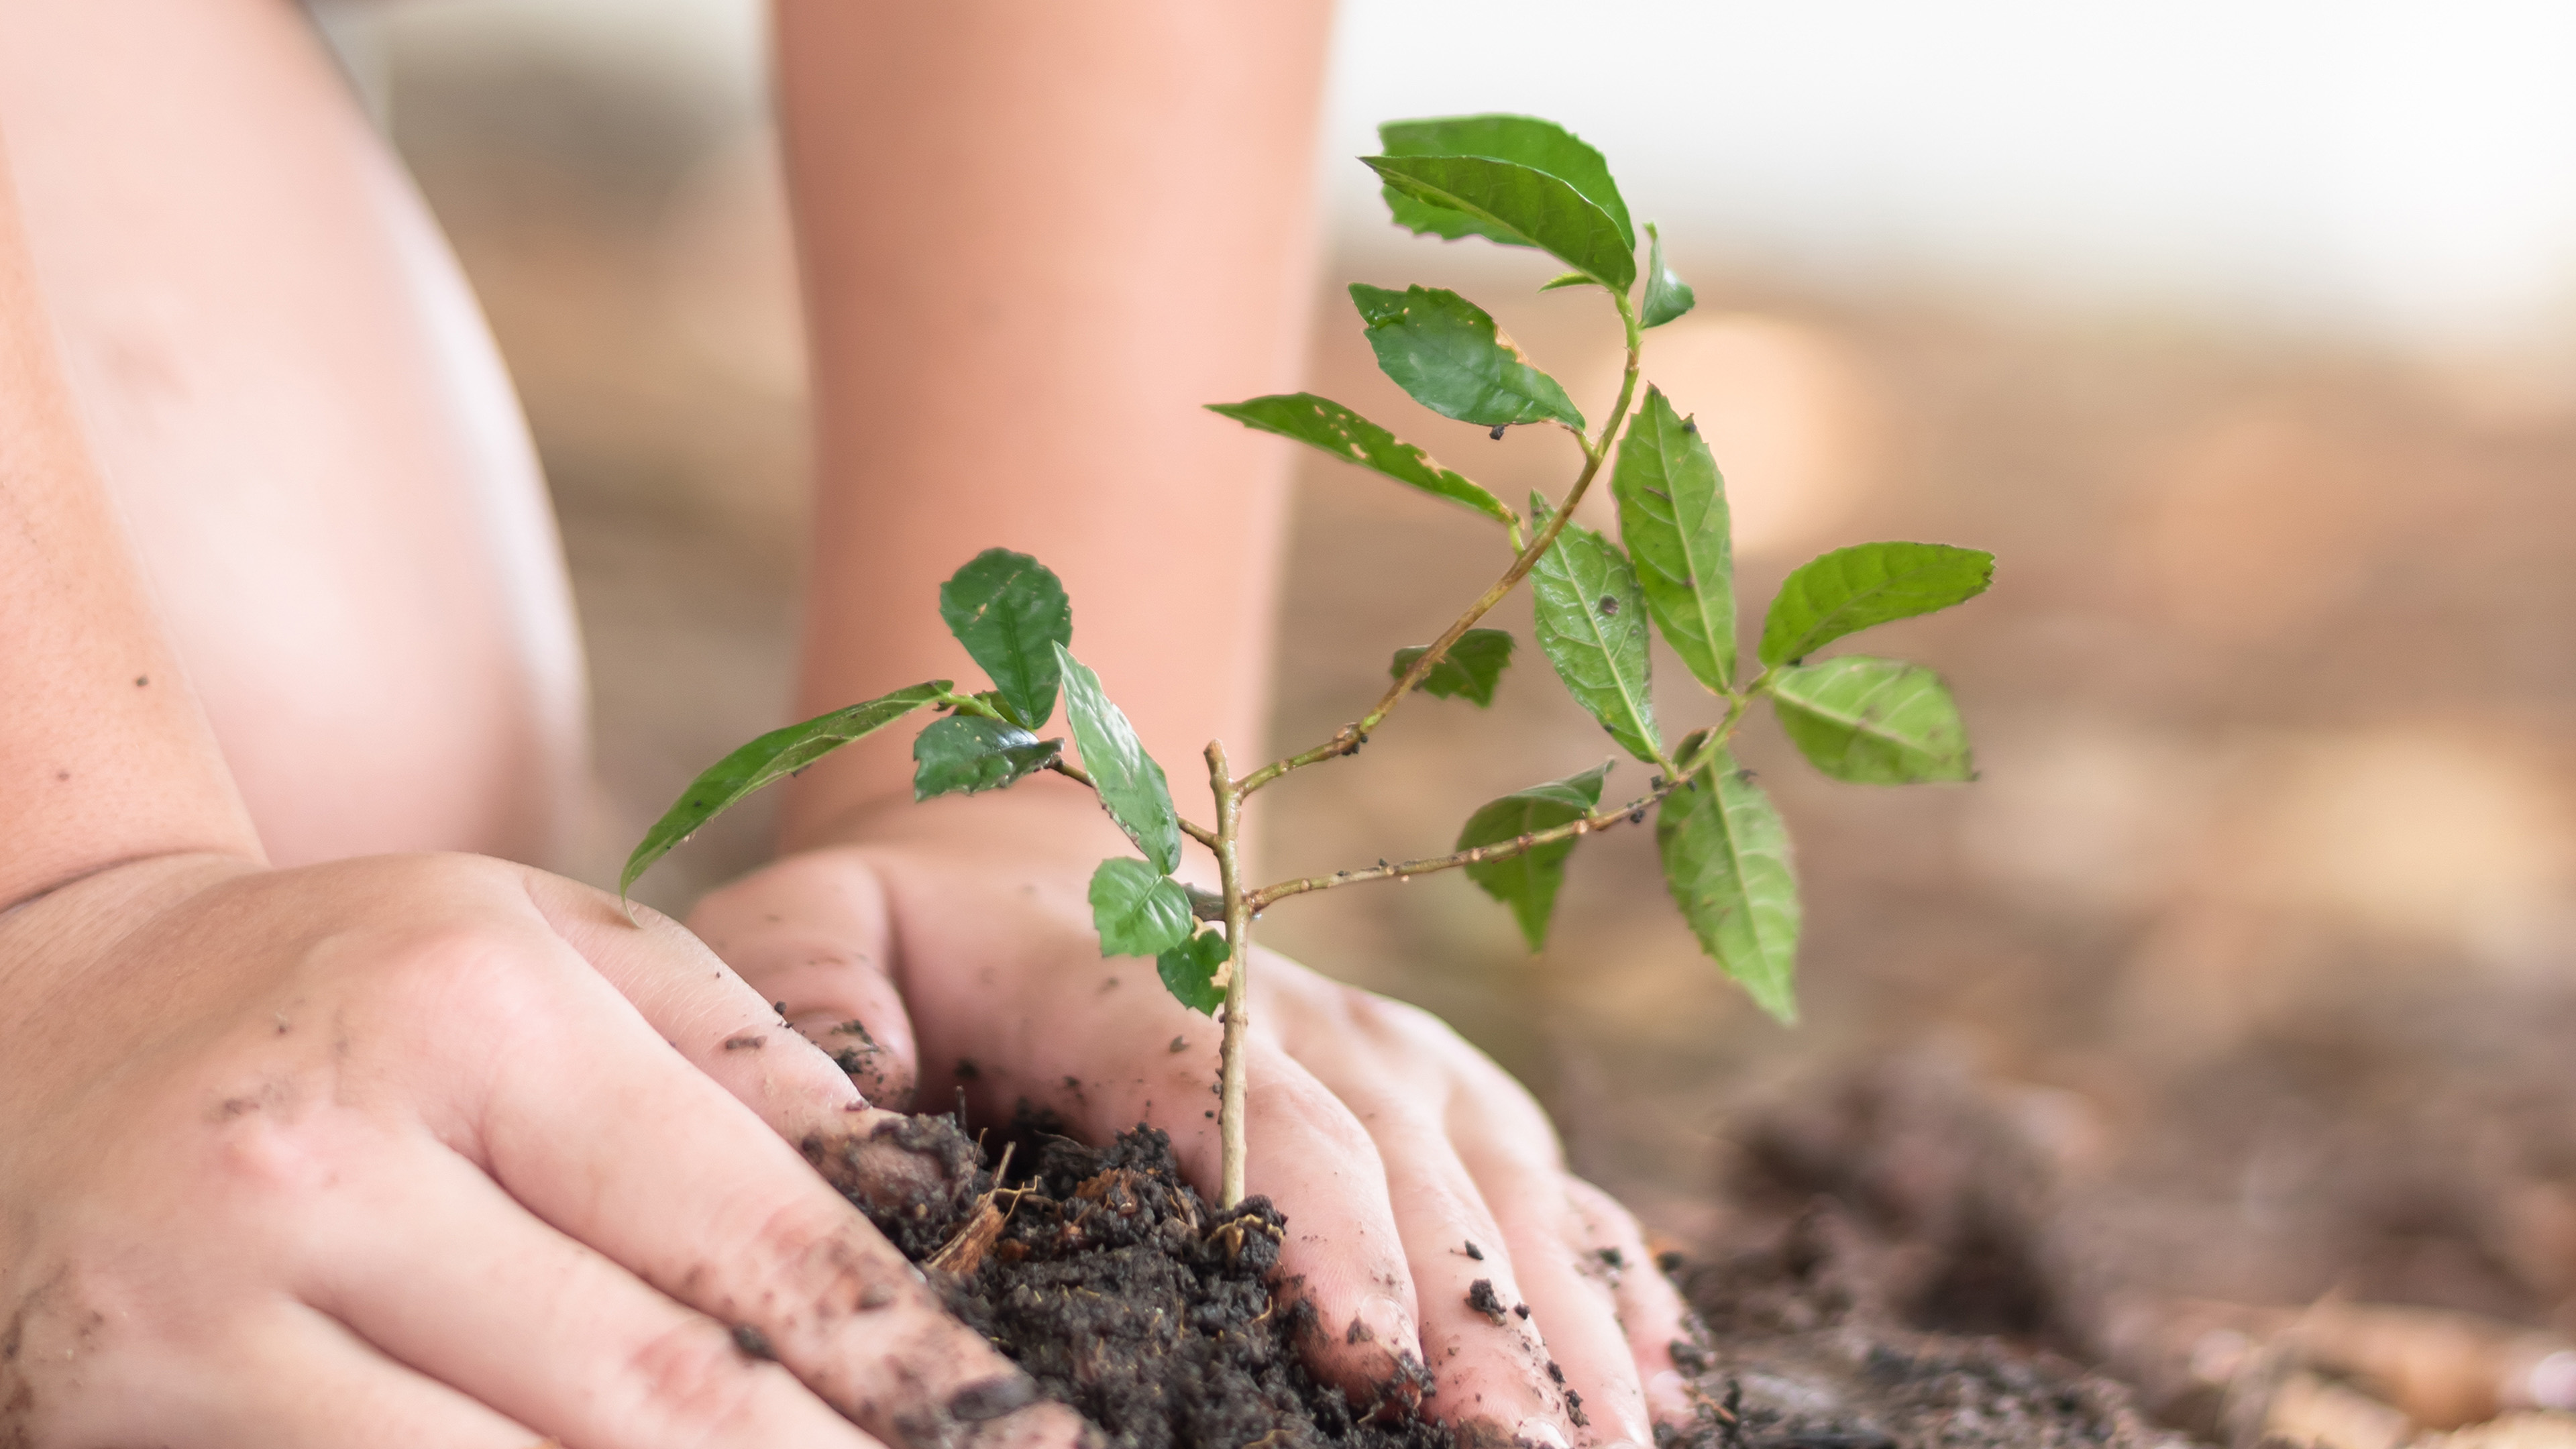 Tree planting growing on soil in child’s hand